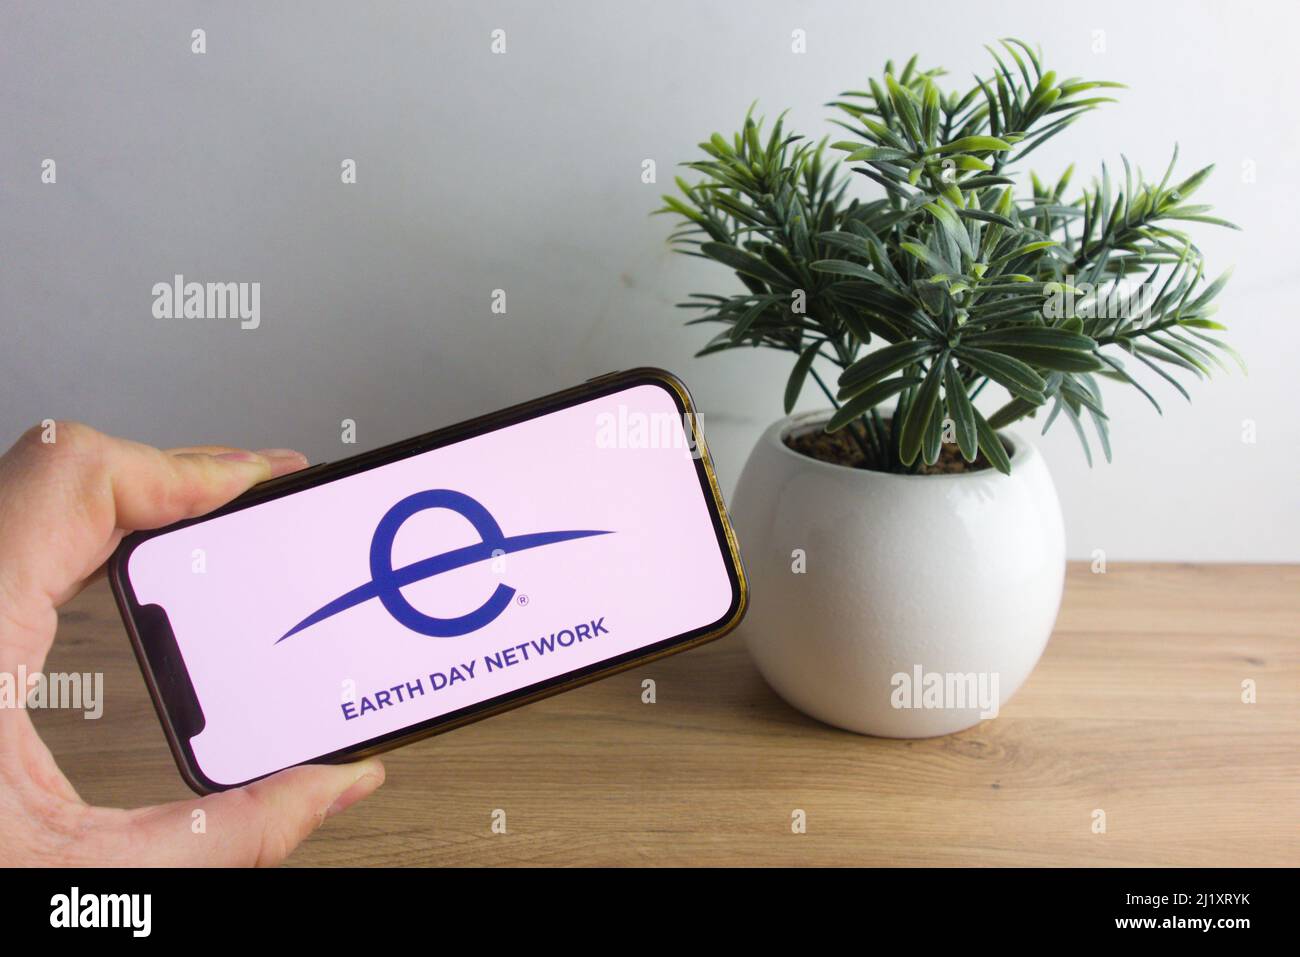 KONSKIE, POLAND - March 26, 2022: Earth Day Network logo displayed on mobile phone Stock Photo